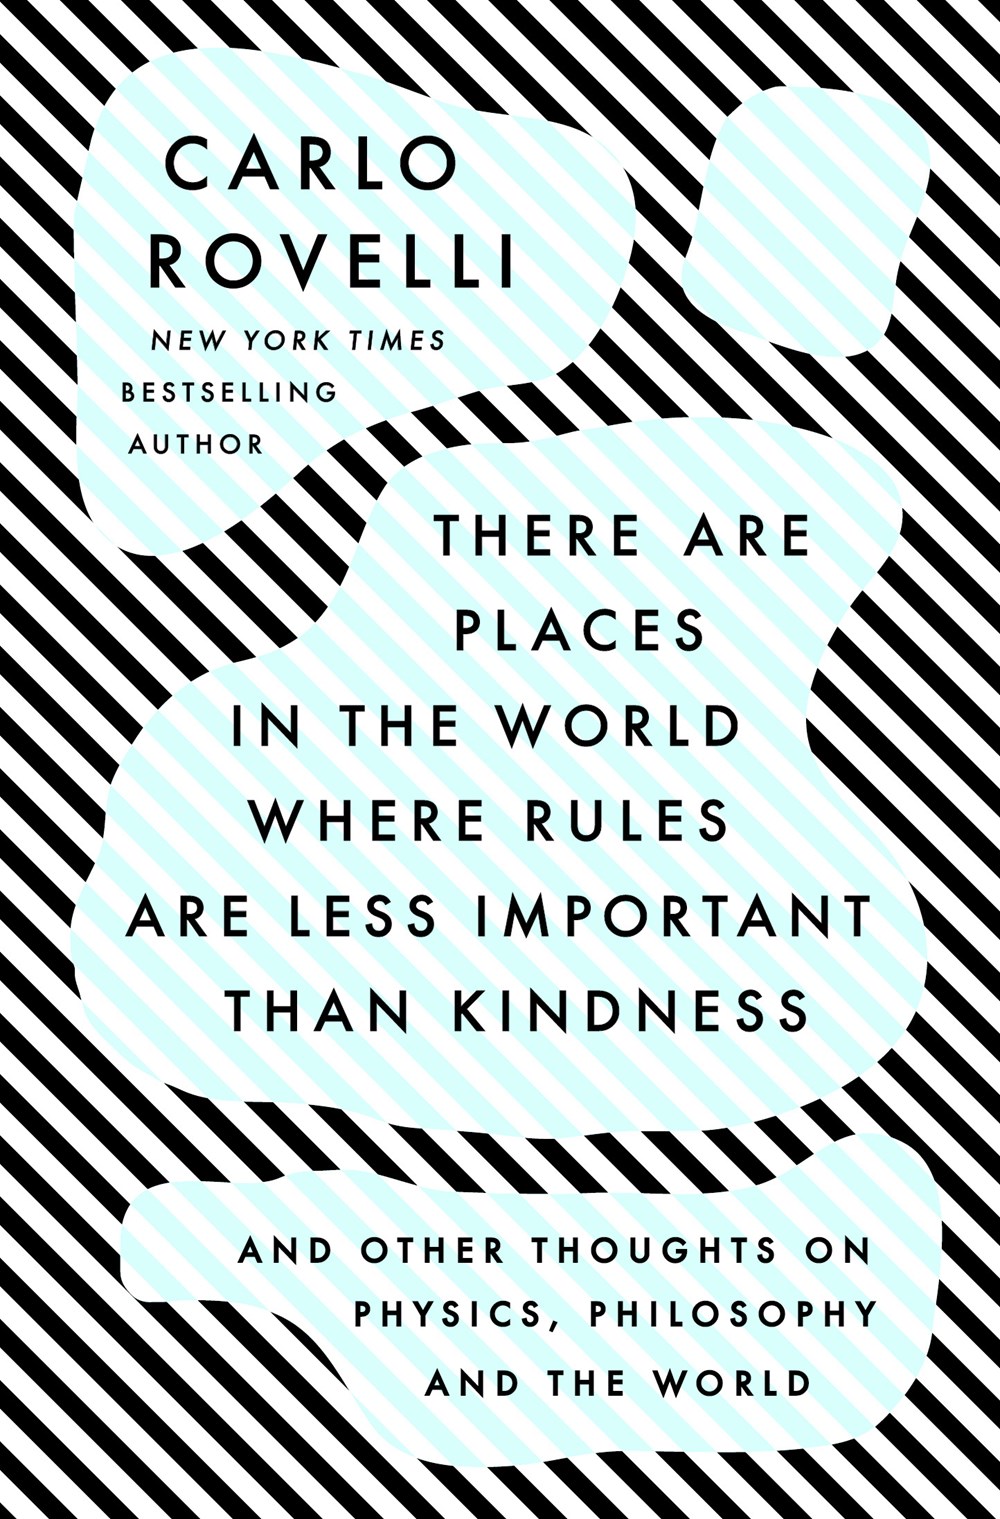 Image of "There Are Places in the World Where Rules Are Less Important Than Kindness: And Other Thoughts on Physics, Philosophy and the World"